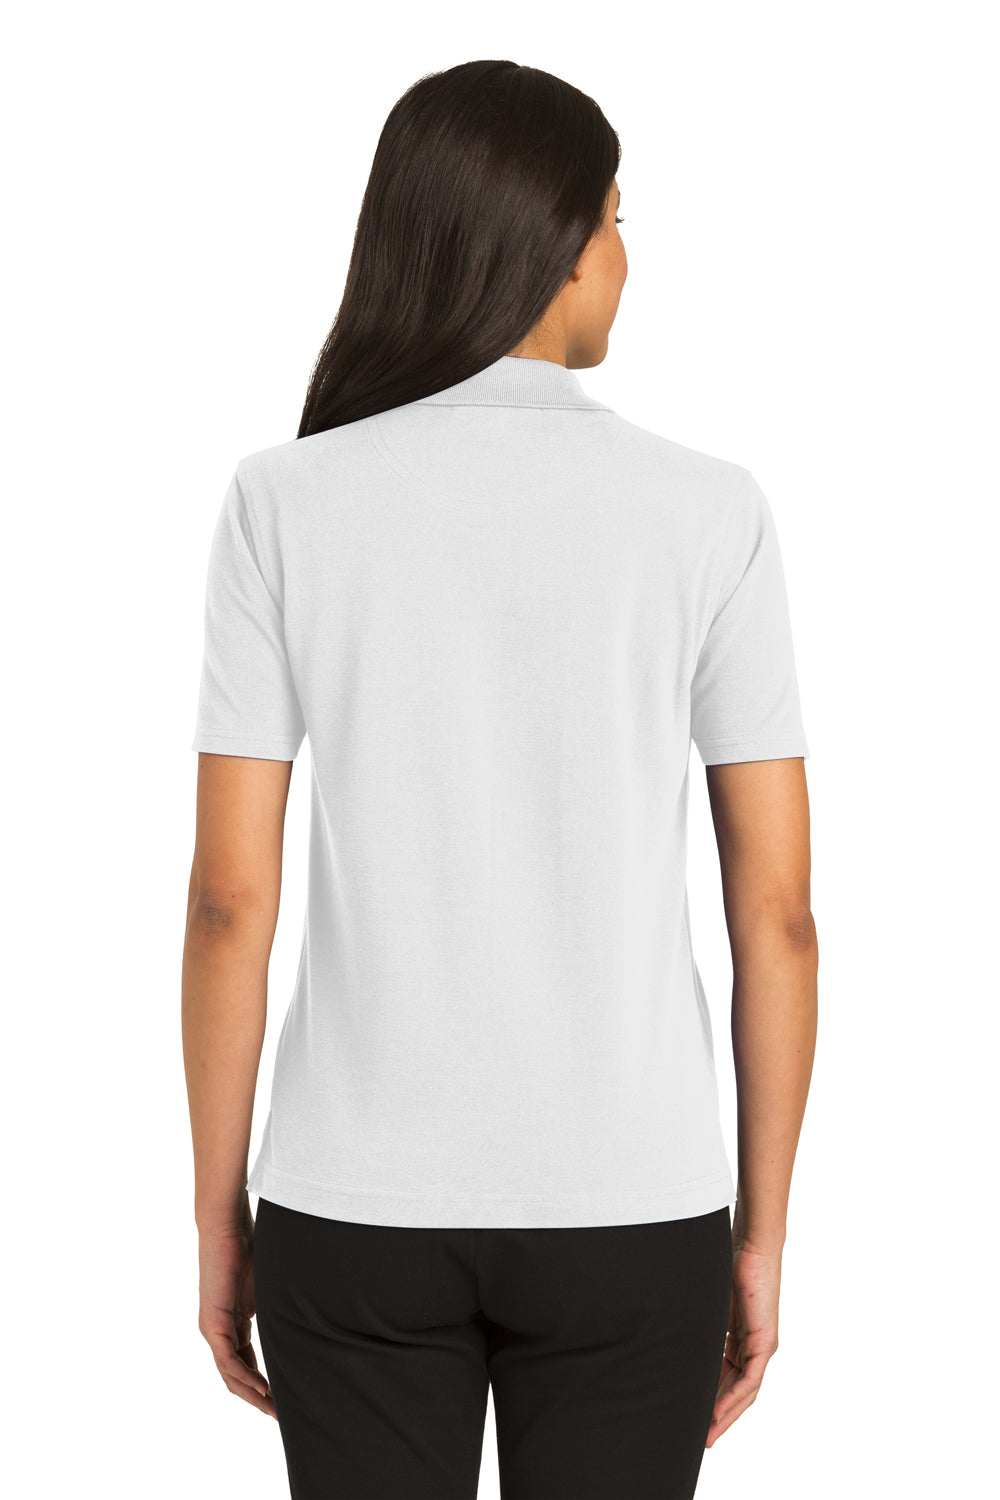 Port Authority L455 Womens Rapid Dry Moisture Wicking Short Sleeve Polo Shirt White Back